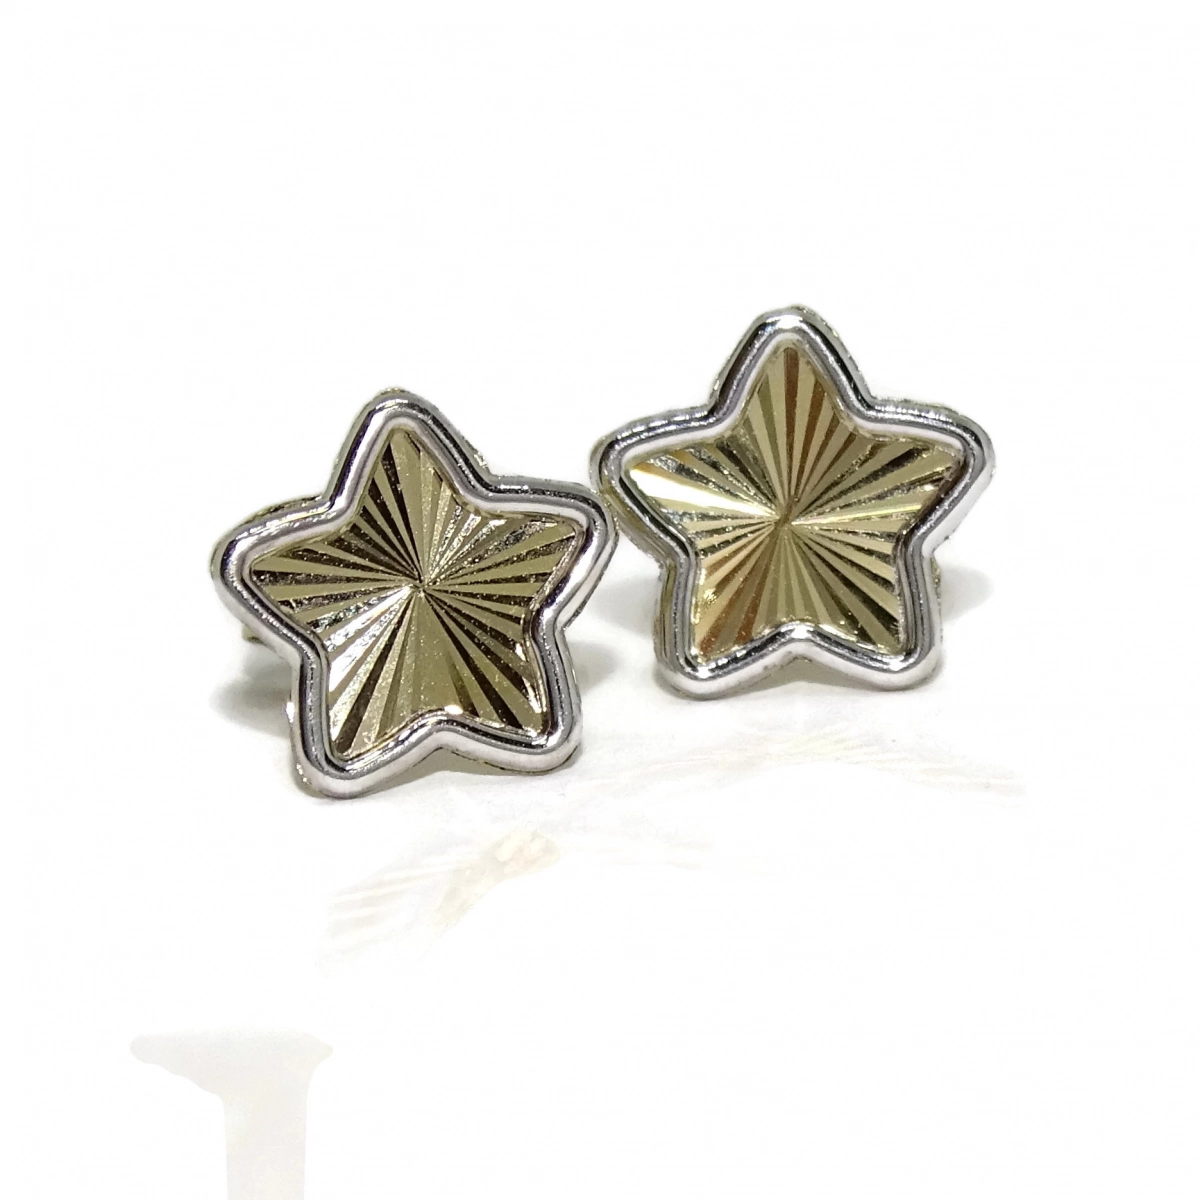 OUTSTANDING STARS OF YELLOW GOLD AND WHITE GOLD IN 18K FOR GIRL AND YOUNG GIRL. PRESSURE NEVER SAY NEVER